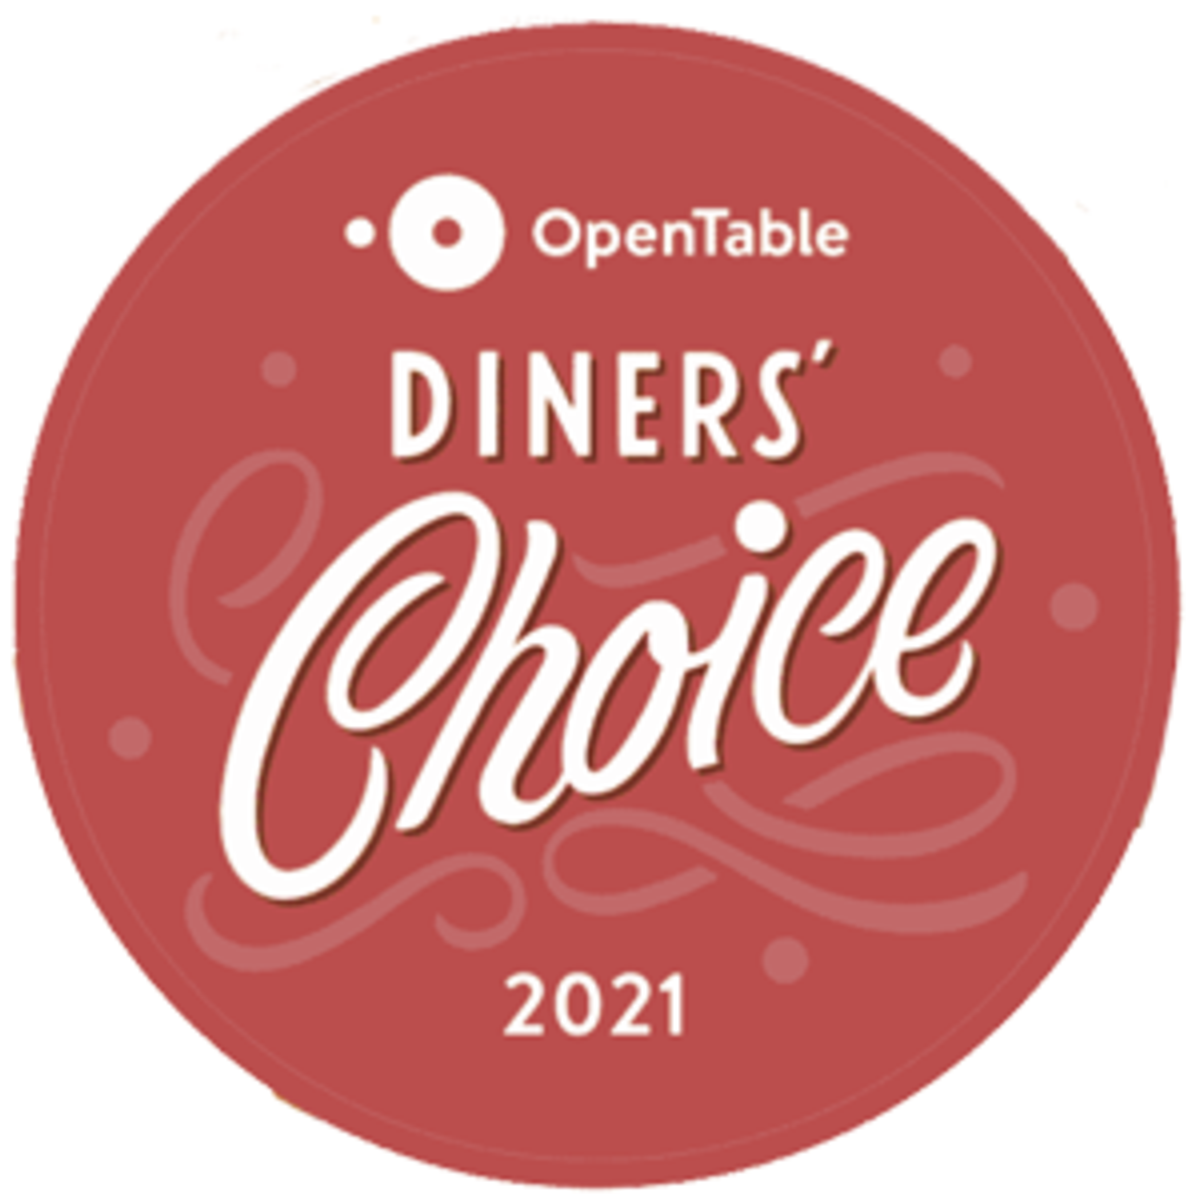 OpenTable Diners Choice 2021